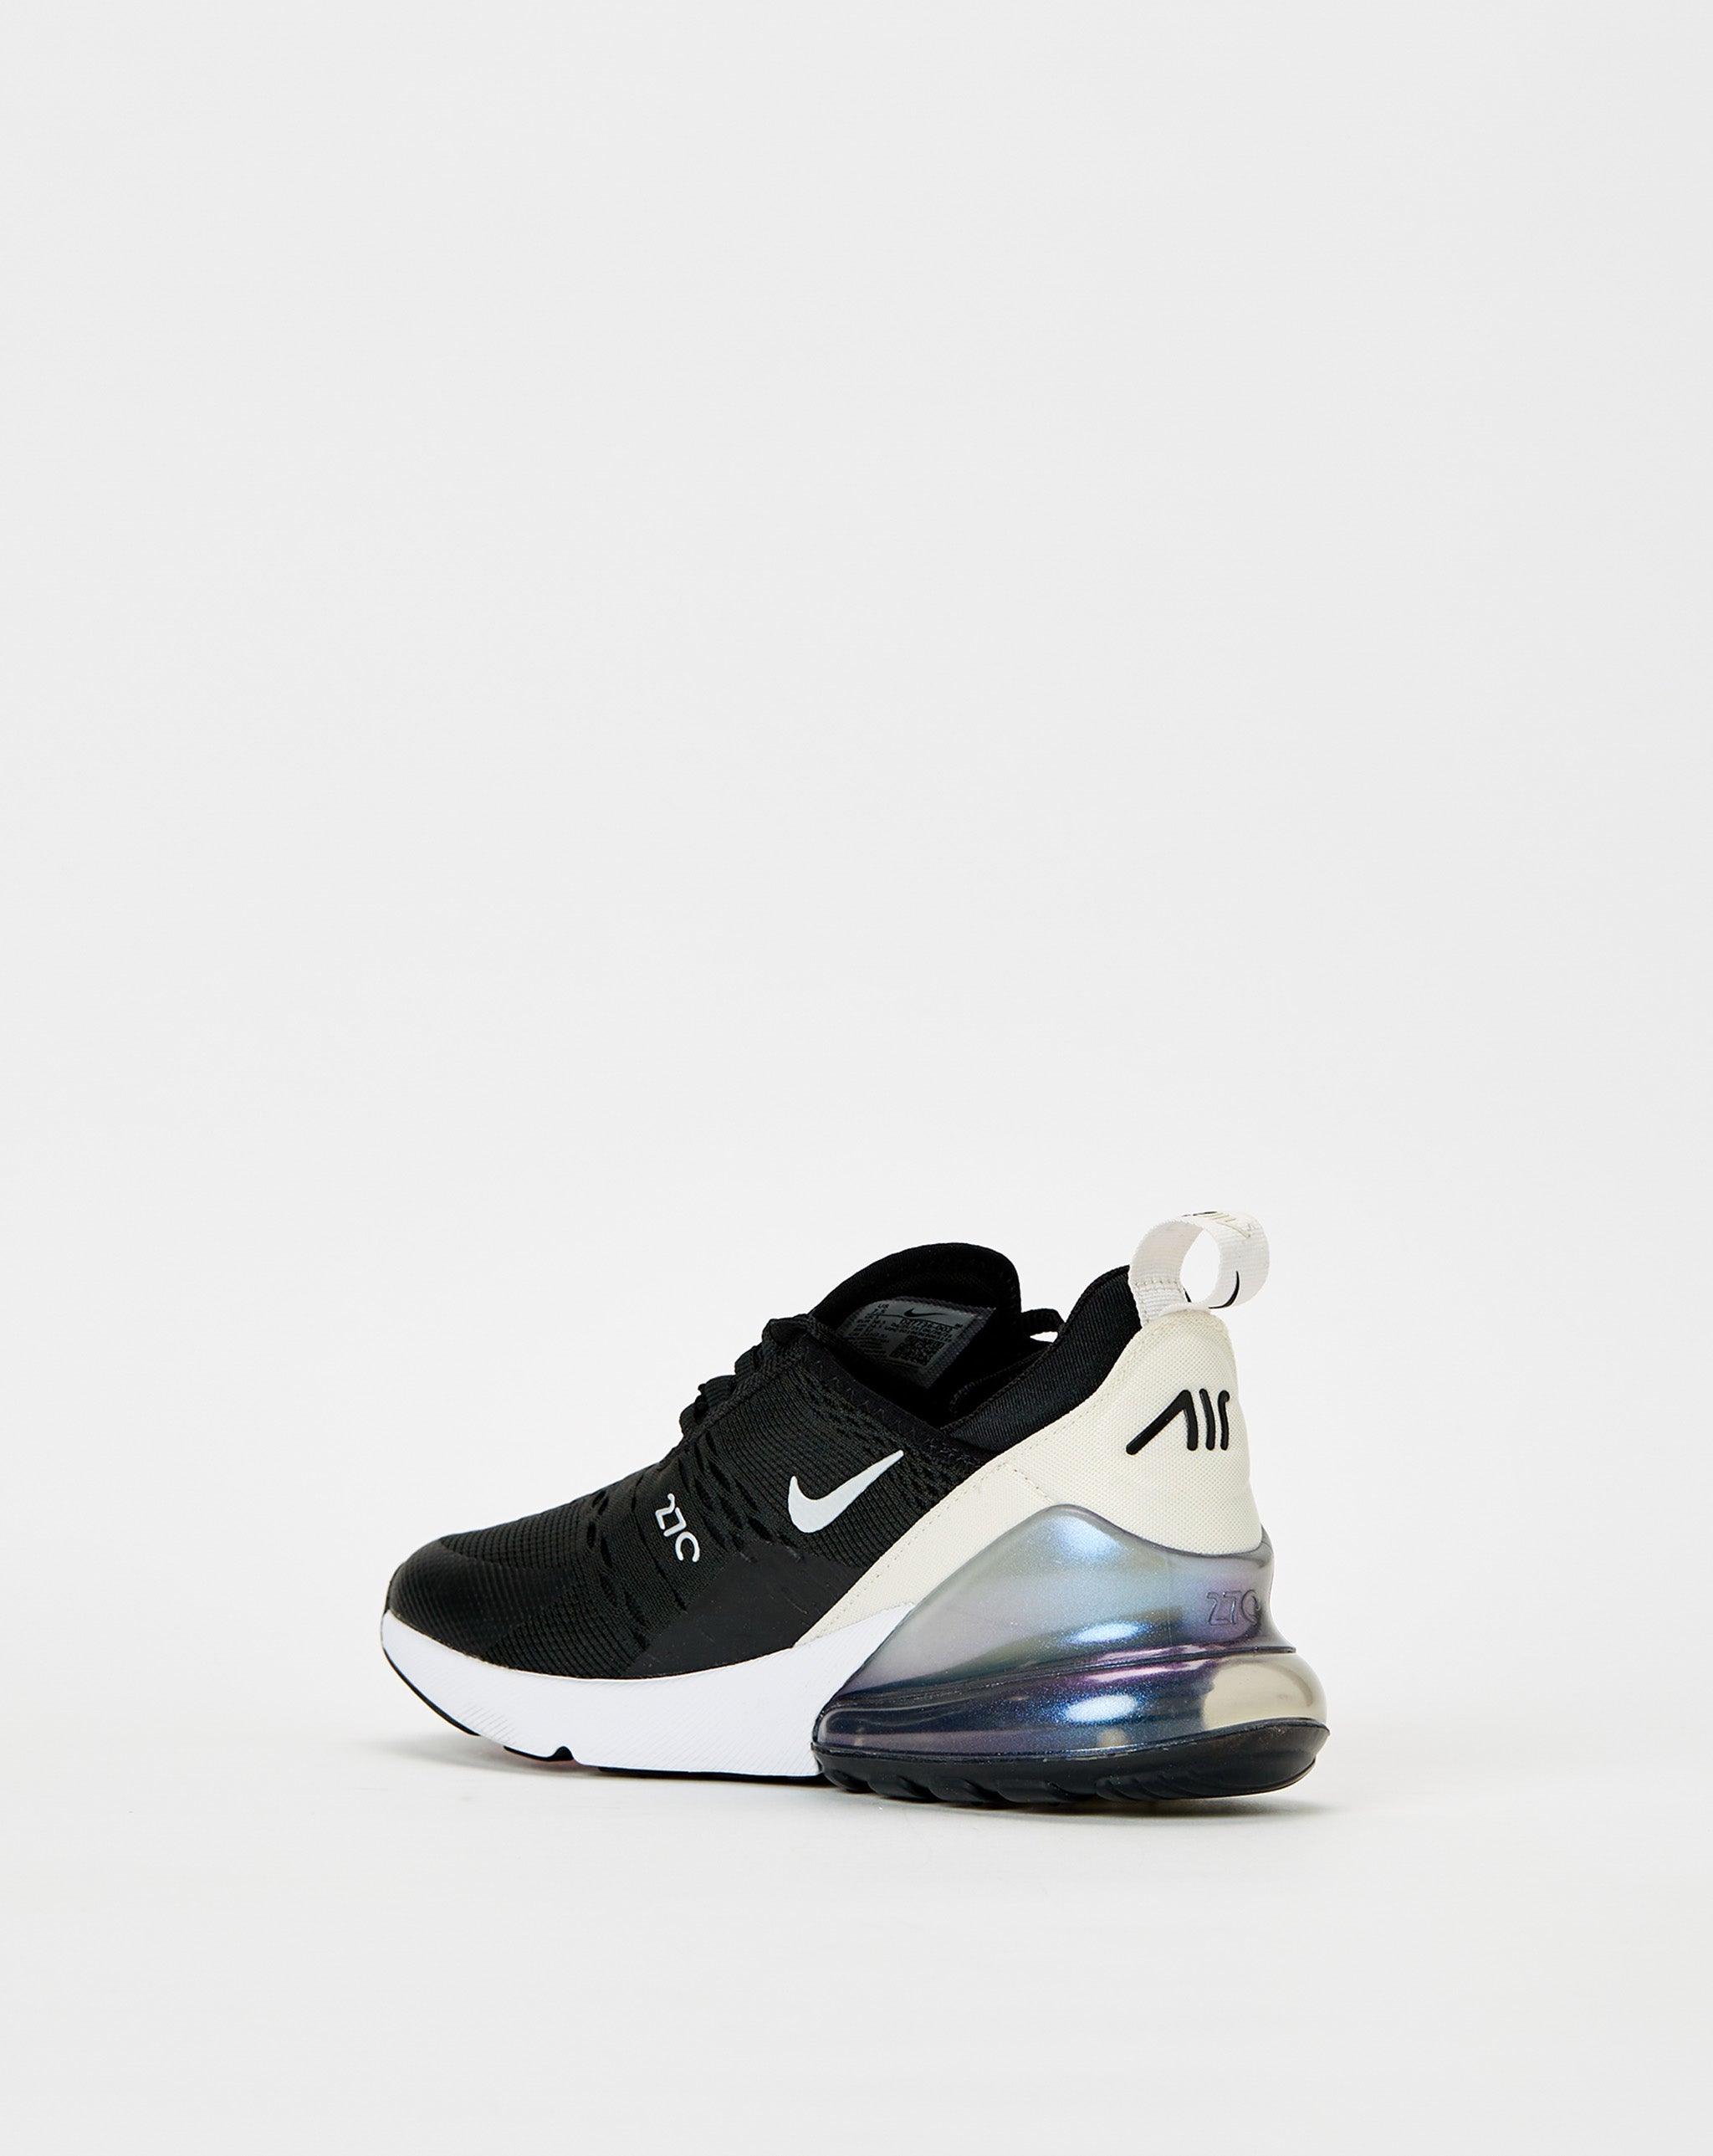 Nike nike air falcon white red gray blue nails color  - Cheap Erlebniswelt-fliegenfischen Jordan outlet